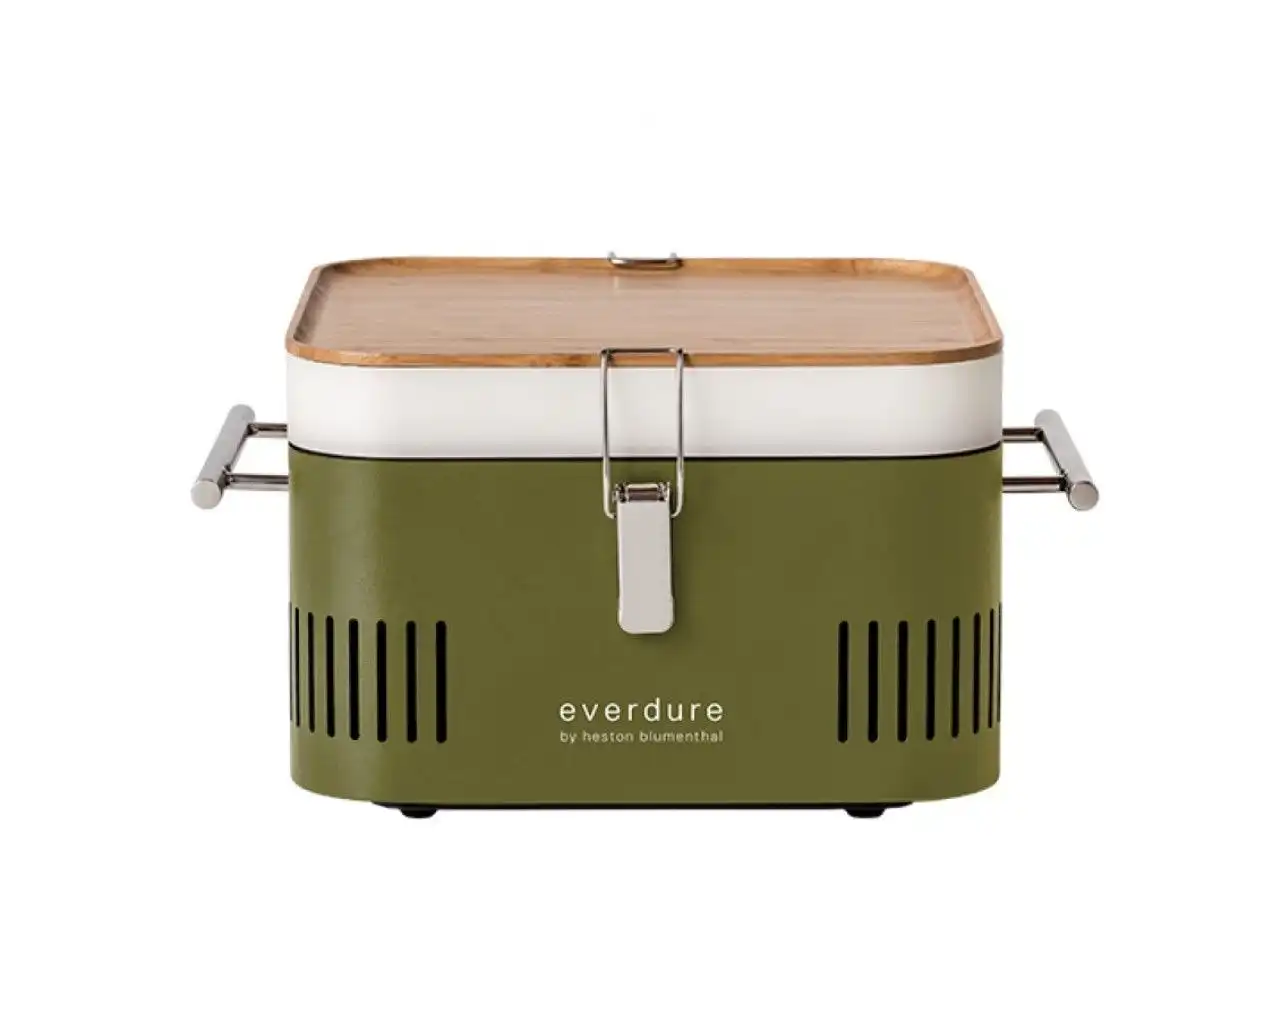 Everdure by Heston Blumenthal CUBE Charcoal Portable Barbeque - Khaki